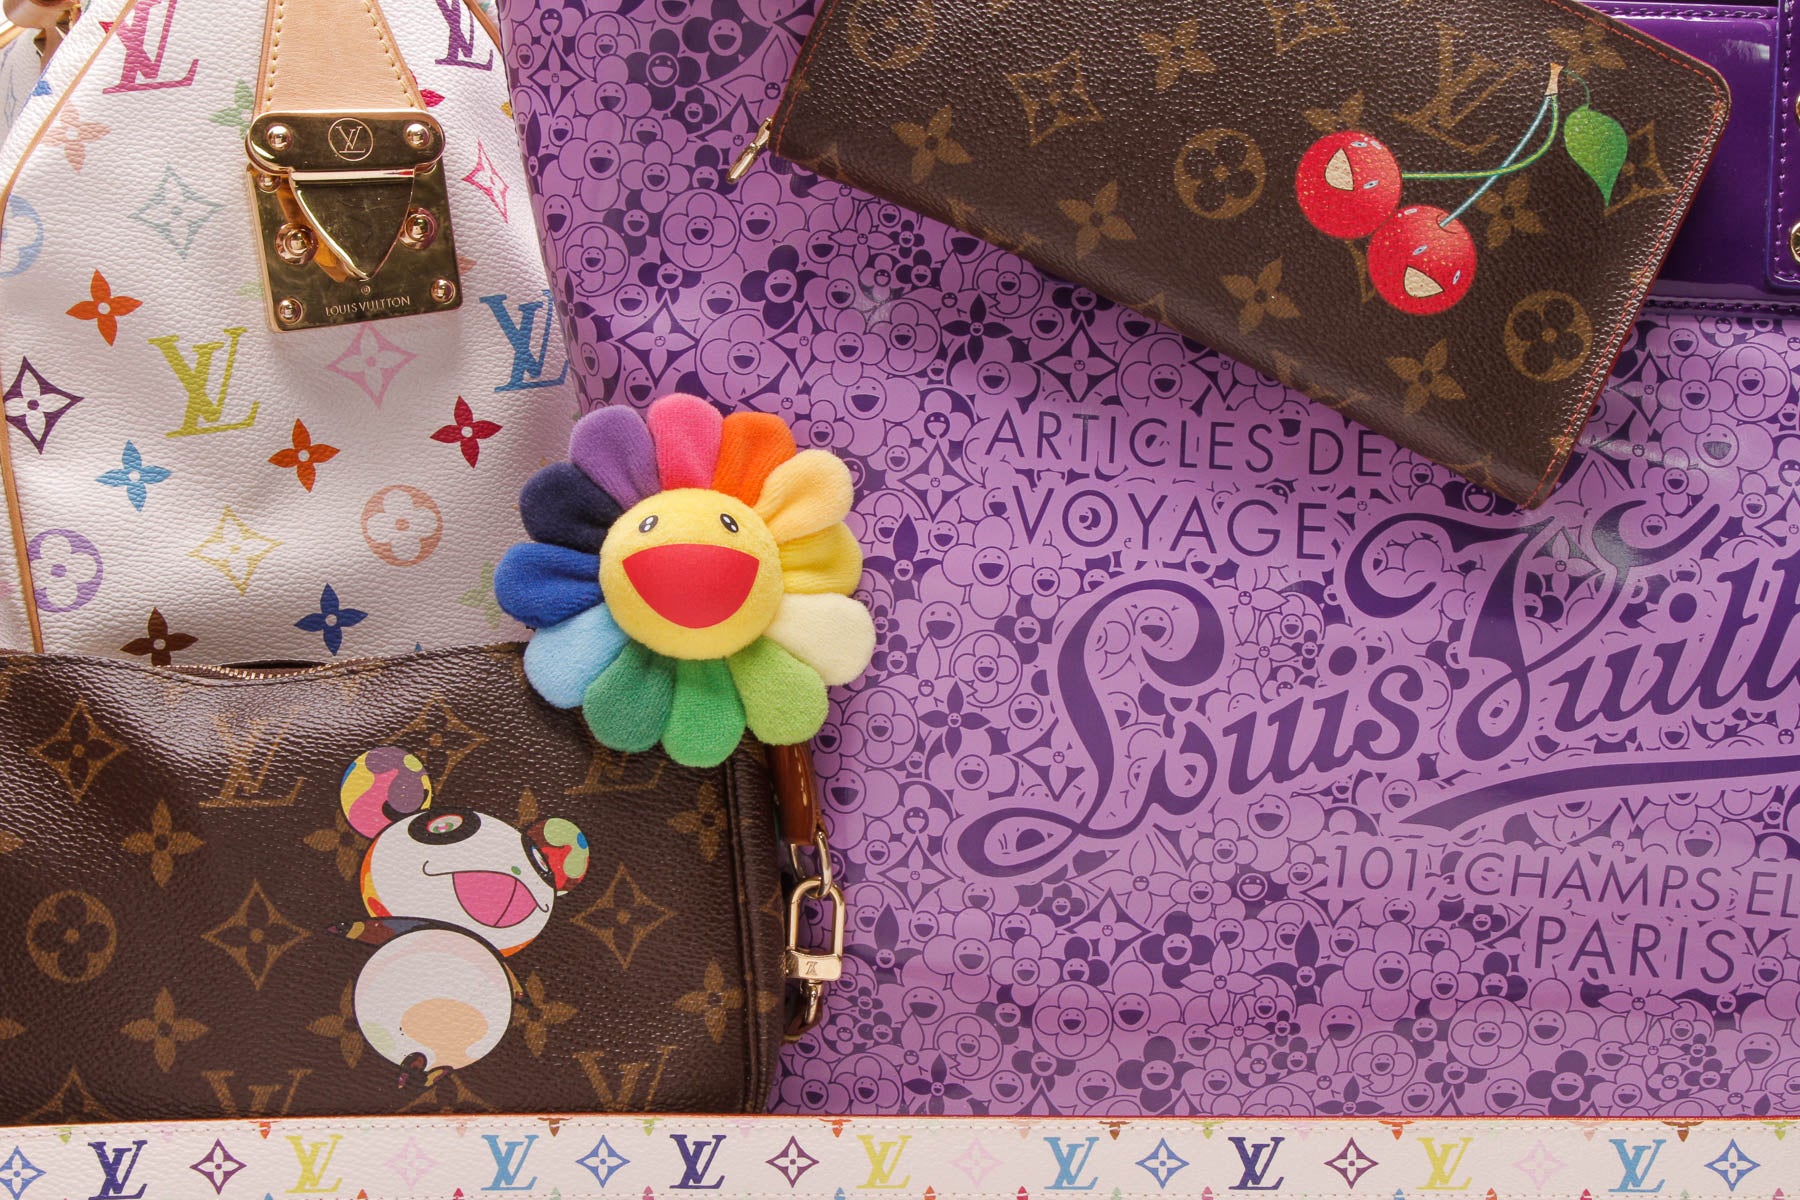 Louis Vuitton Discontinuing Murakami Monogram Bags: Last Chance to Buy in  July